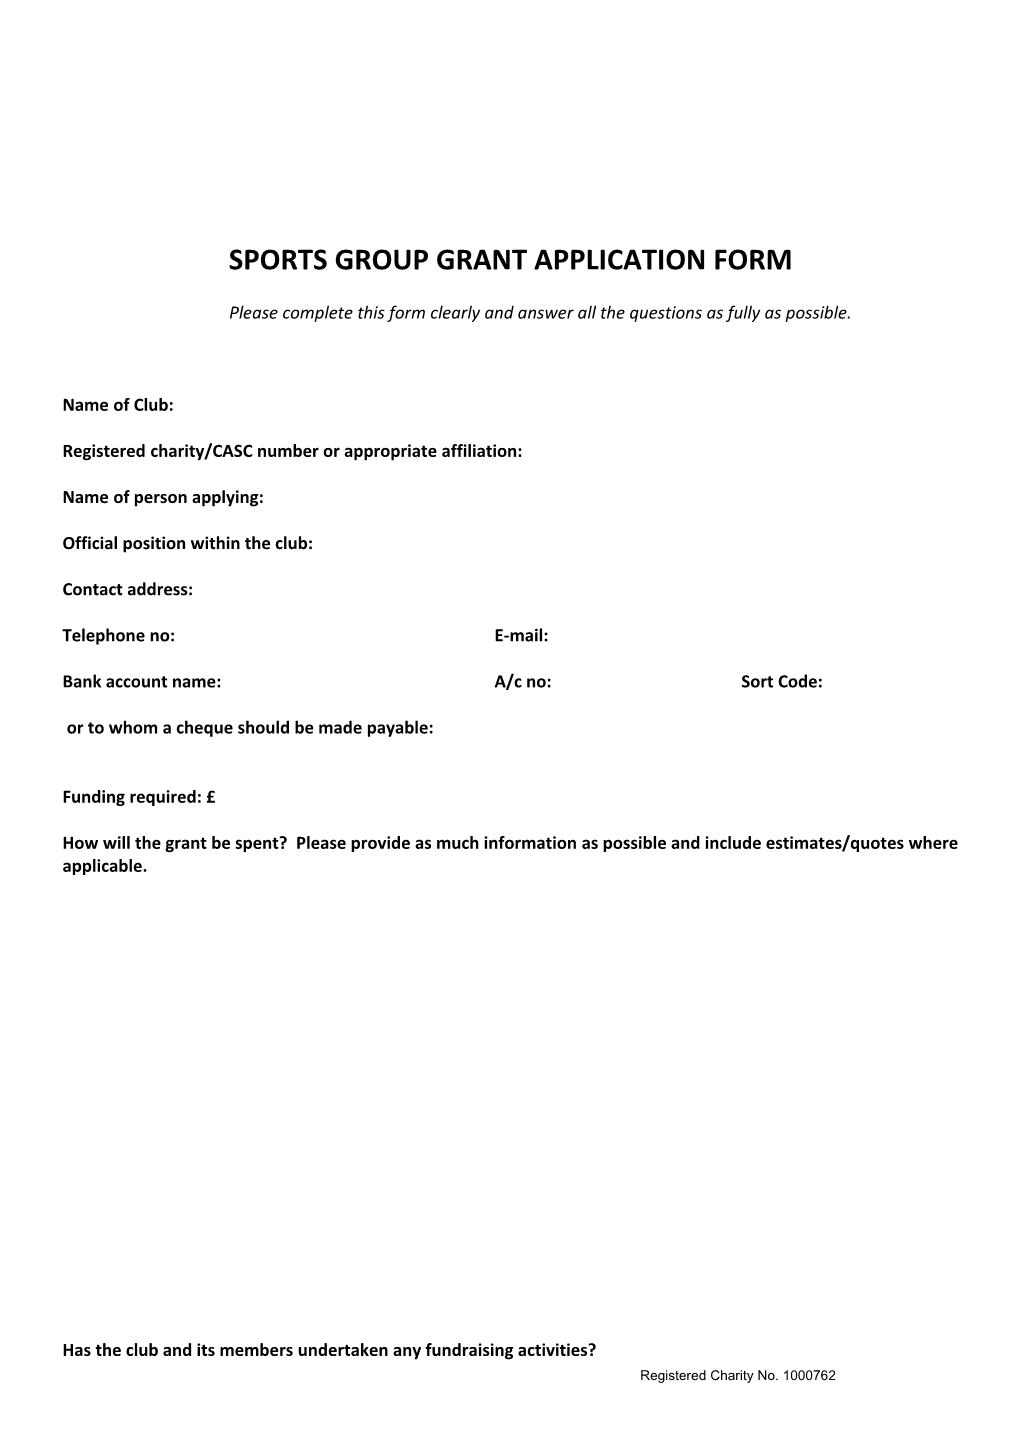 Grant Application Form for Groups